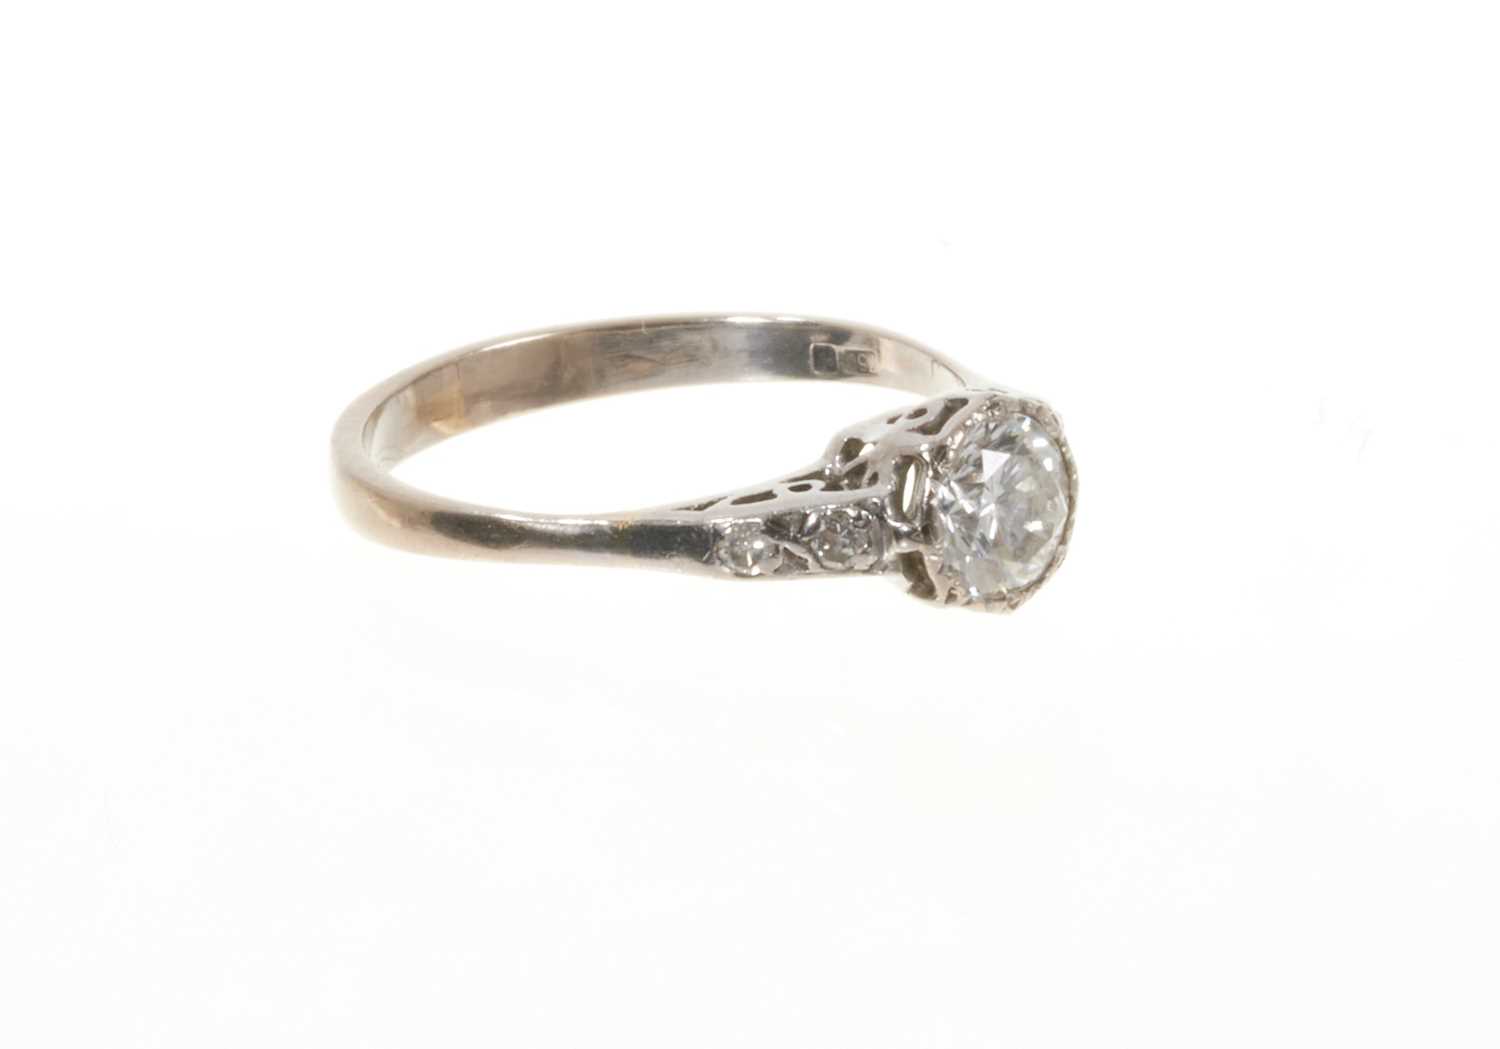 Diamond single stone ring with a round brilliant cut diamond estimated to weigh approximately 0.50ct - Image 2 of 4